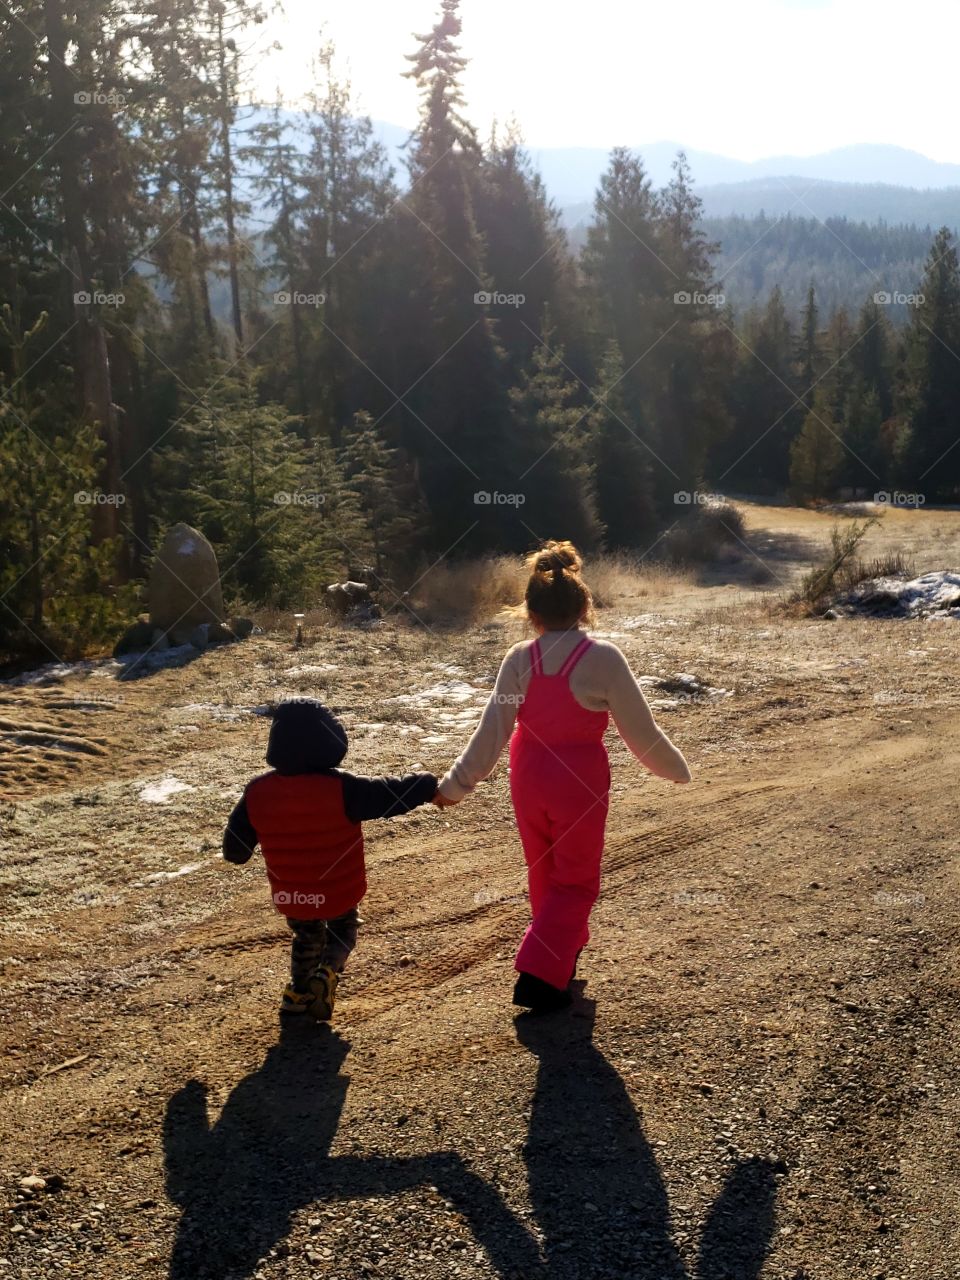 children holding hands walking in forrest on nature hiking trail